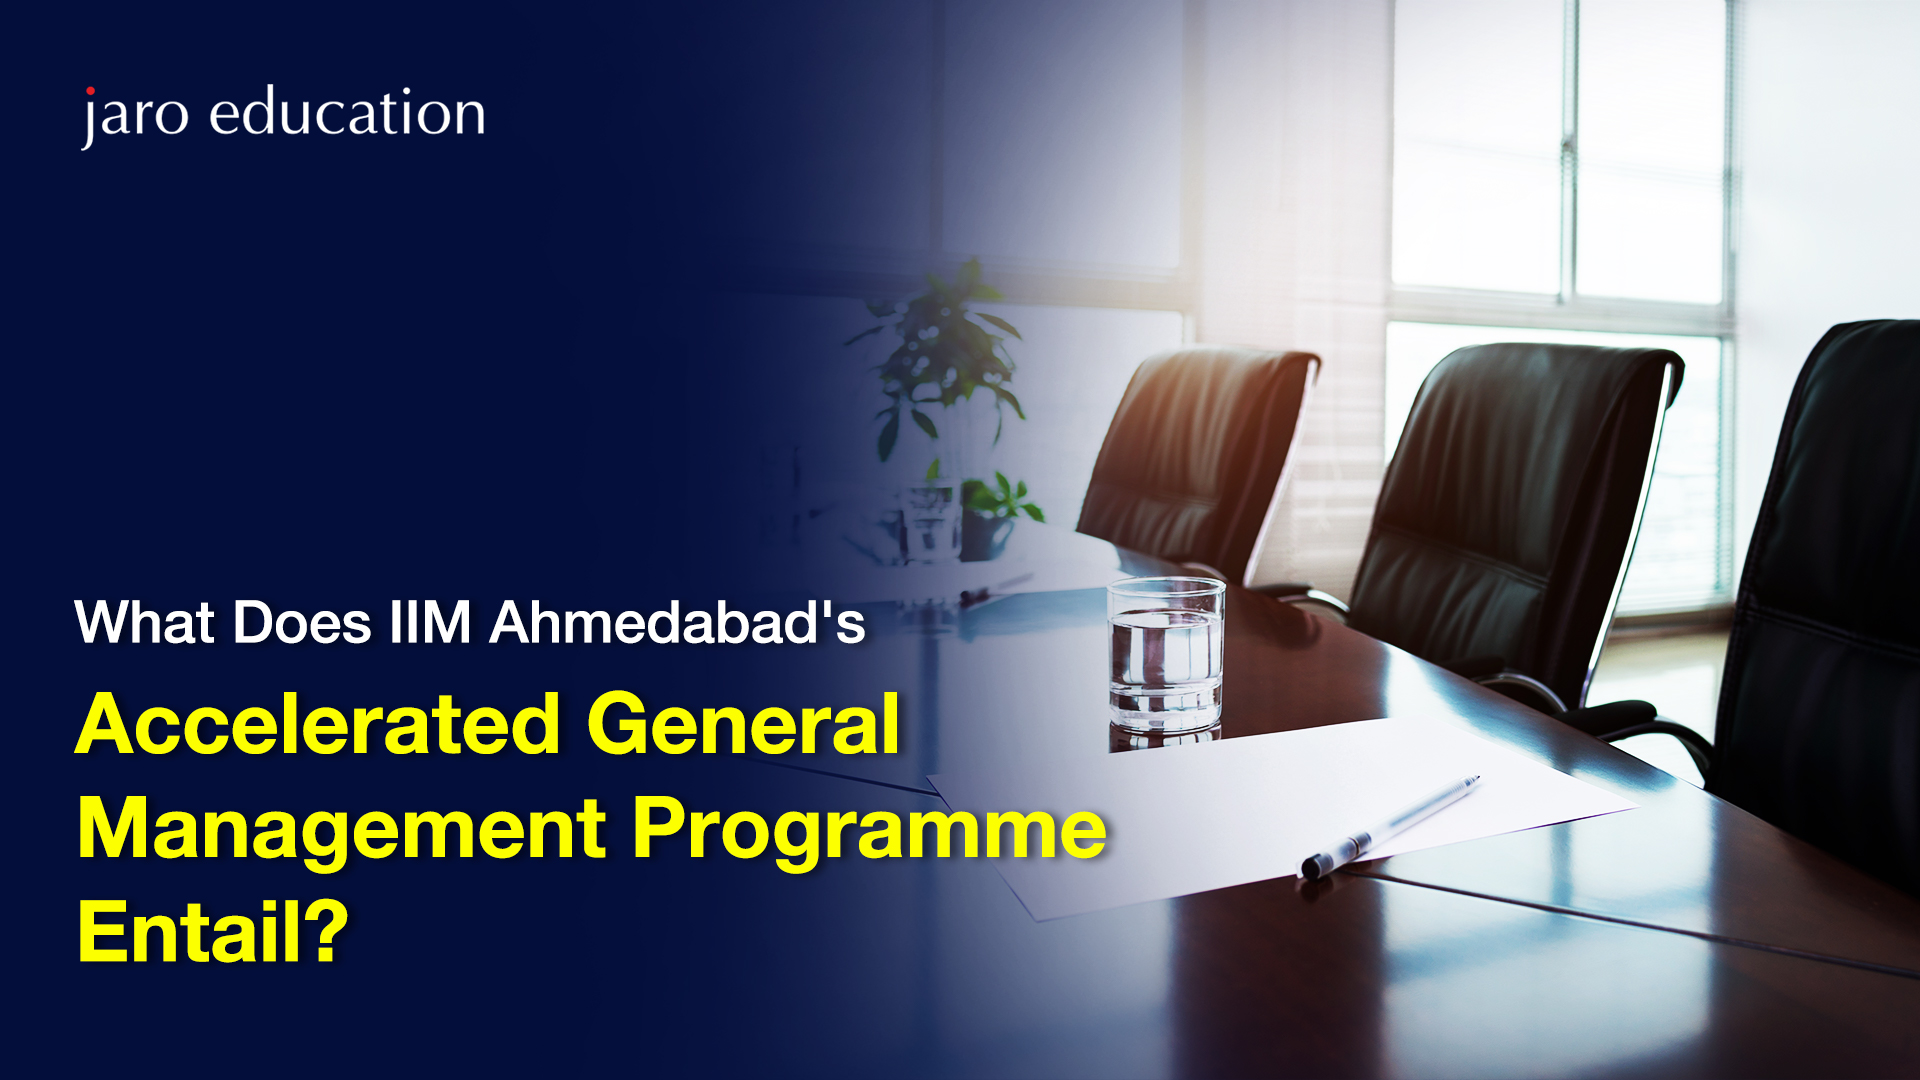 Accelerated General Management Programme Jaro